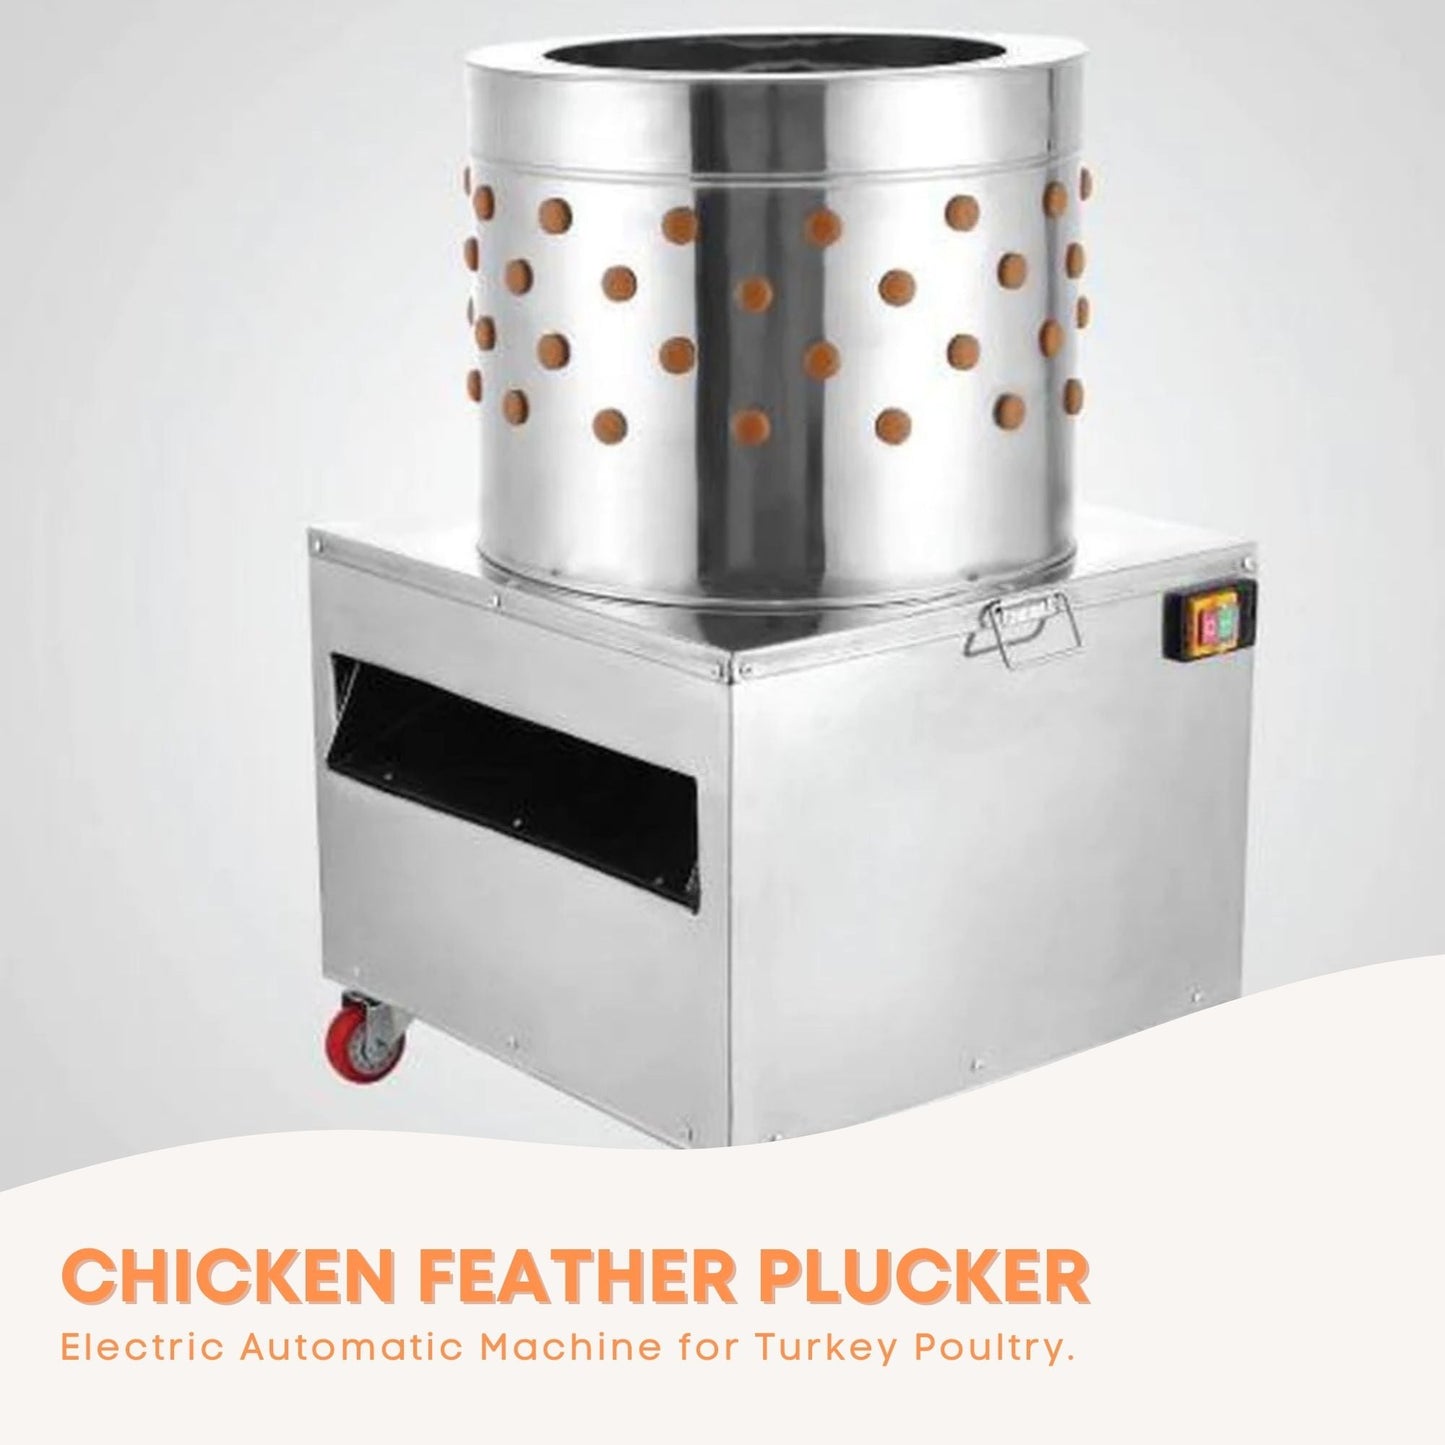 50cm Chicken Feather Plucker - Electric Automatic Machine - For Turkey Poultry